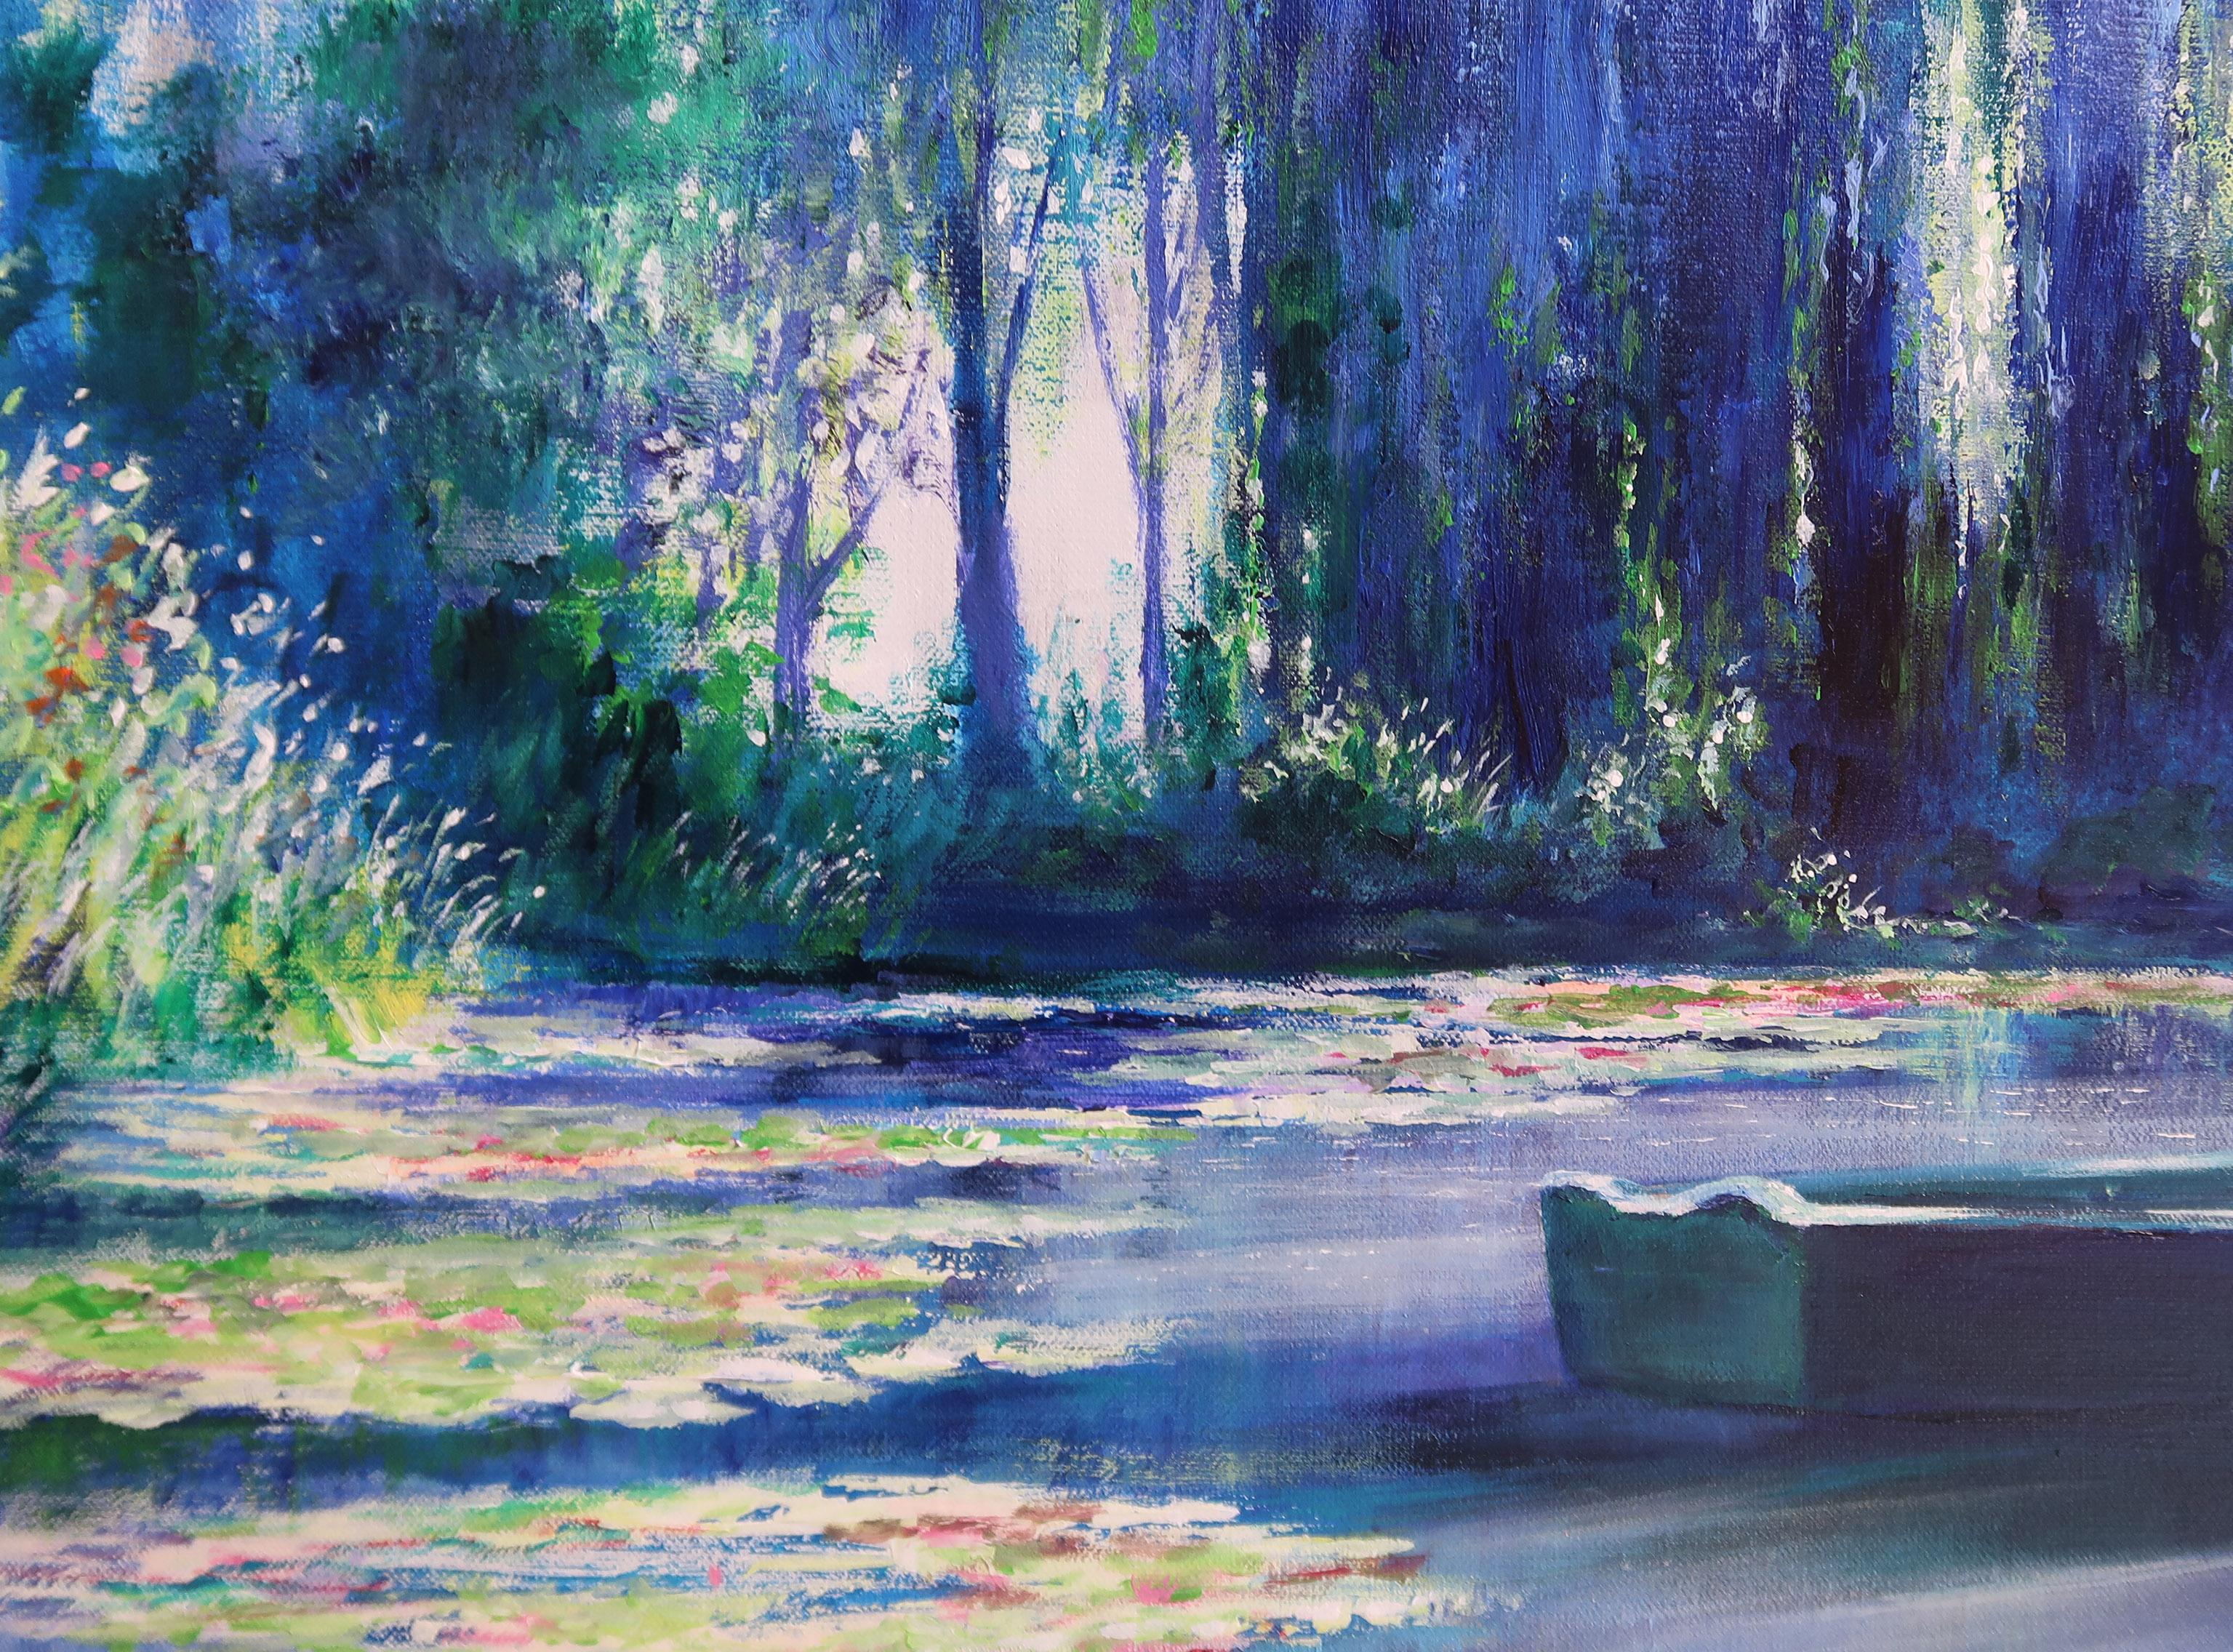 Harmony in blue at Giverny (Water Gardens at Claude Monet’s house), Original art - Blue Still-Life Painting by Mary Chaplin